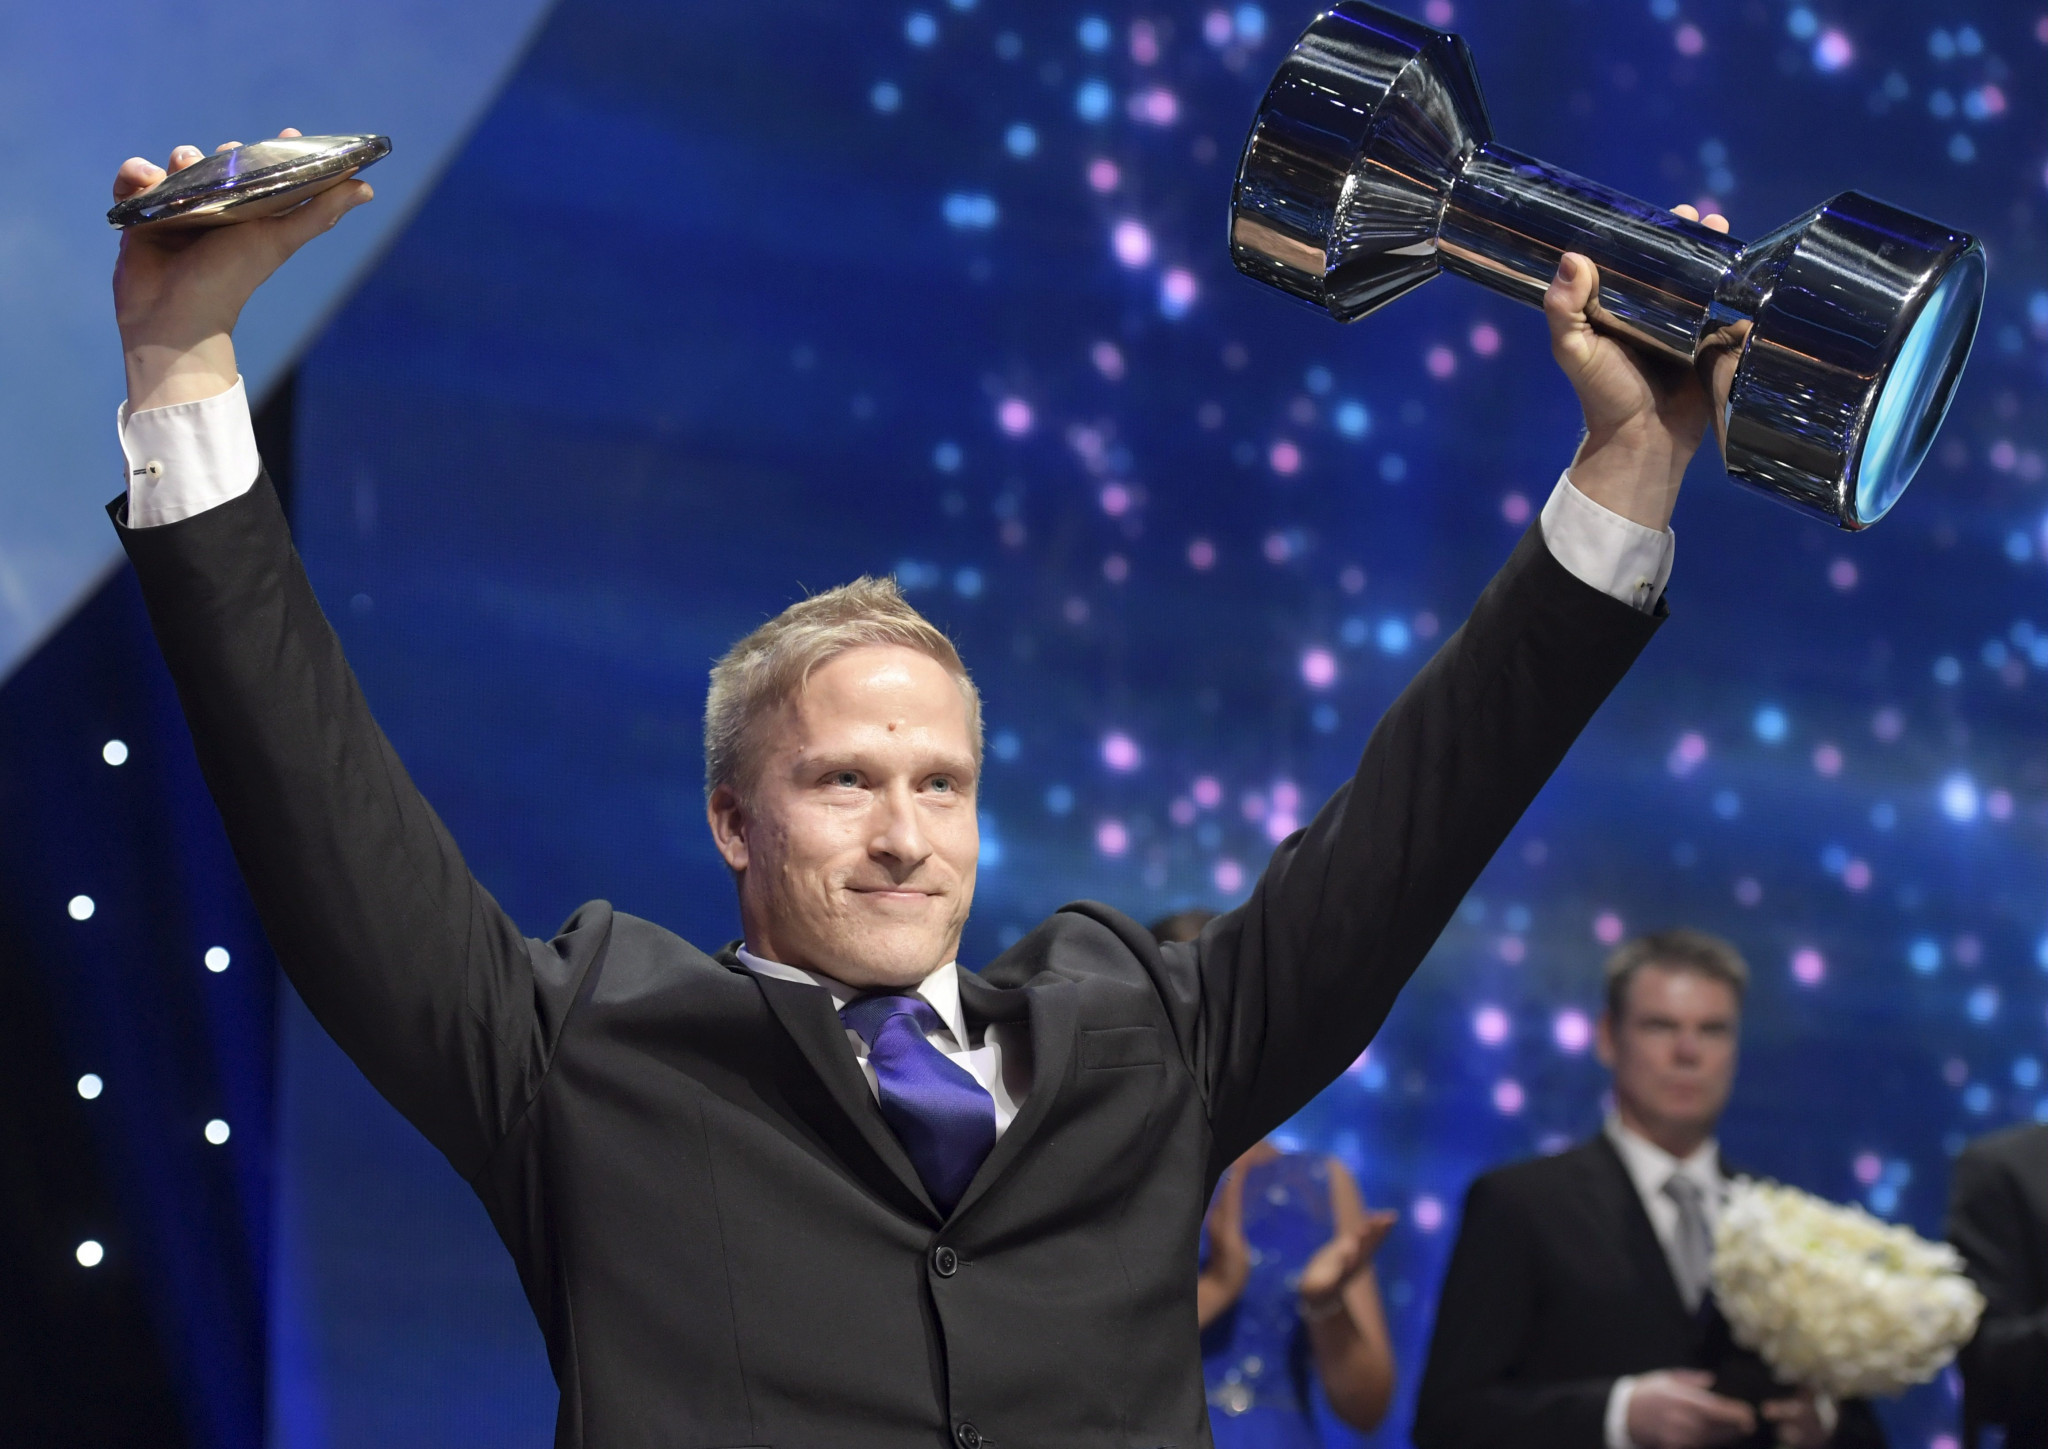 Paralympian Tähti named Finland's athlete of the year for fourth time 